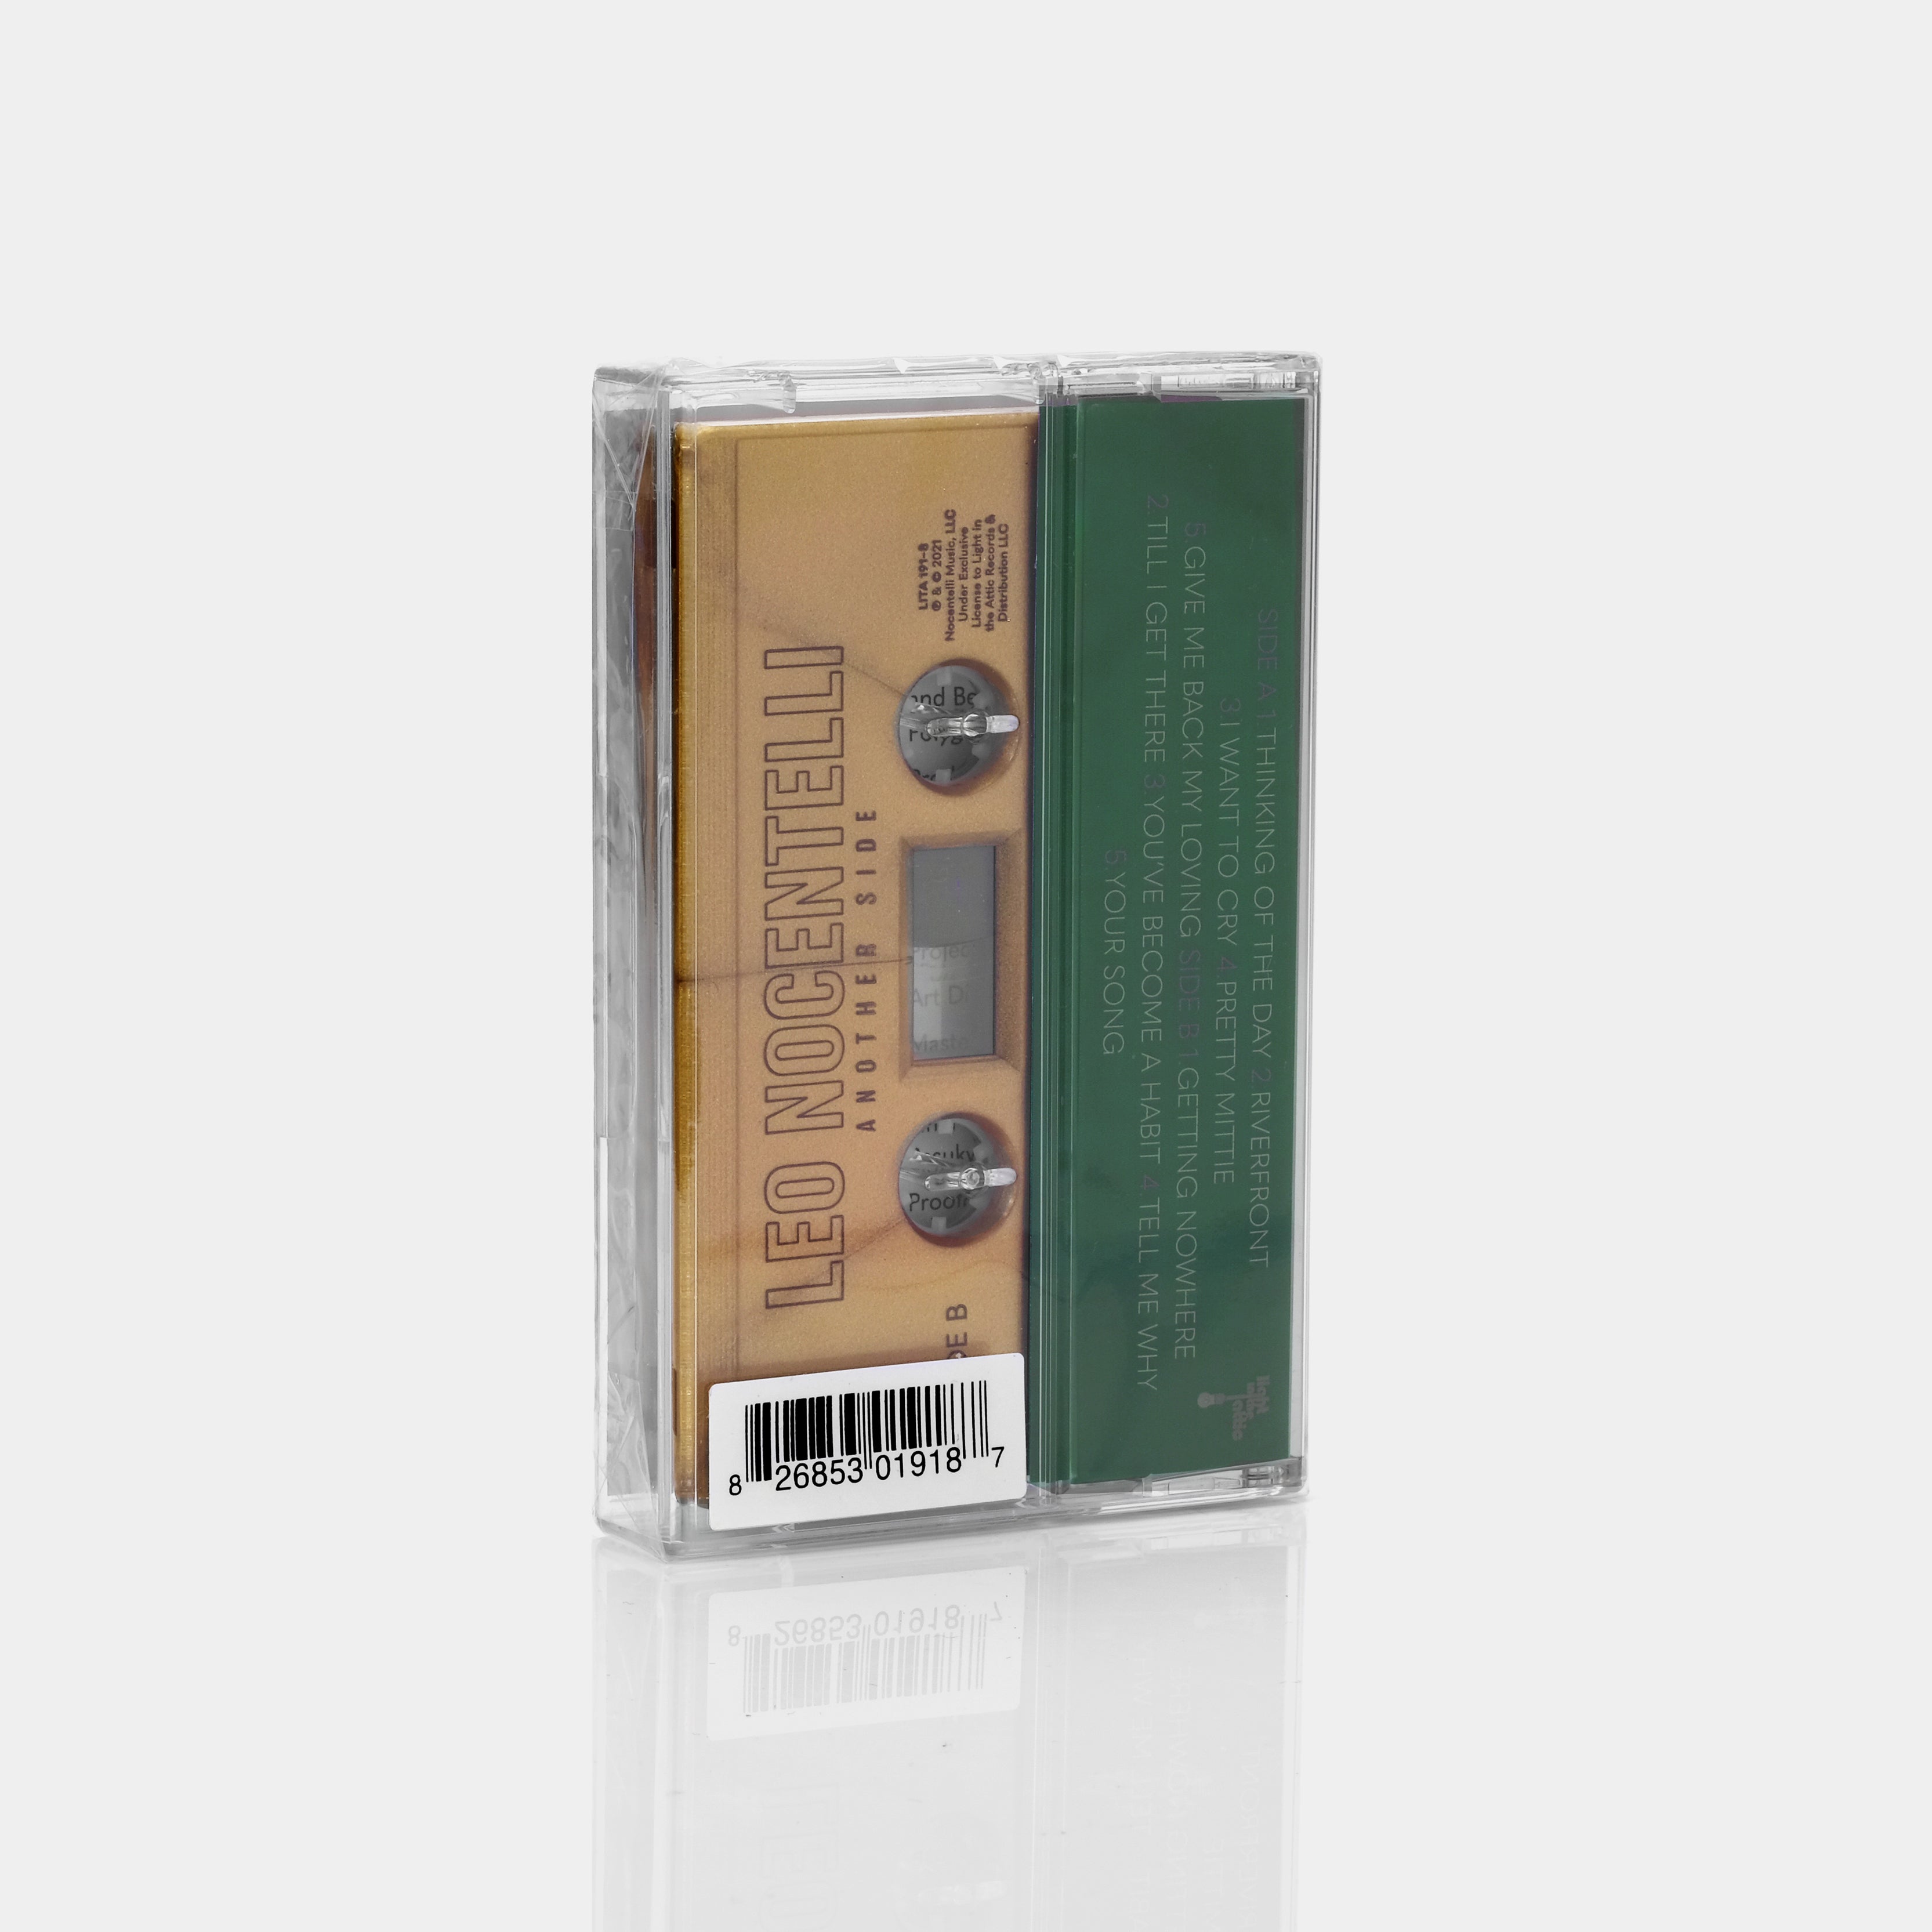 Leo Nocentelli - Another Side Cassette Tape